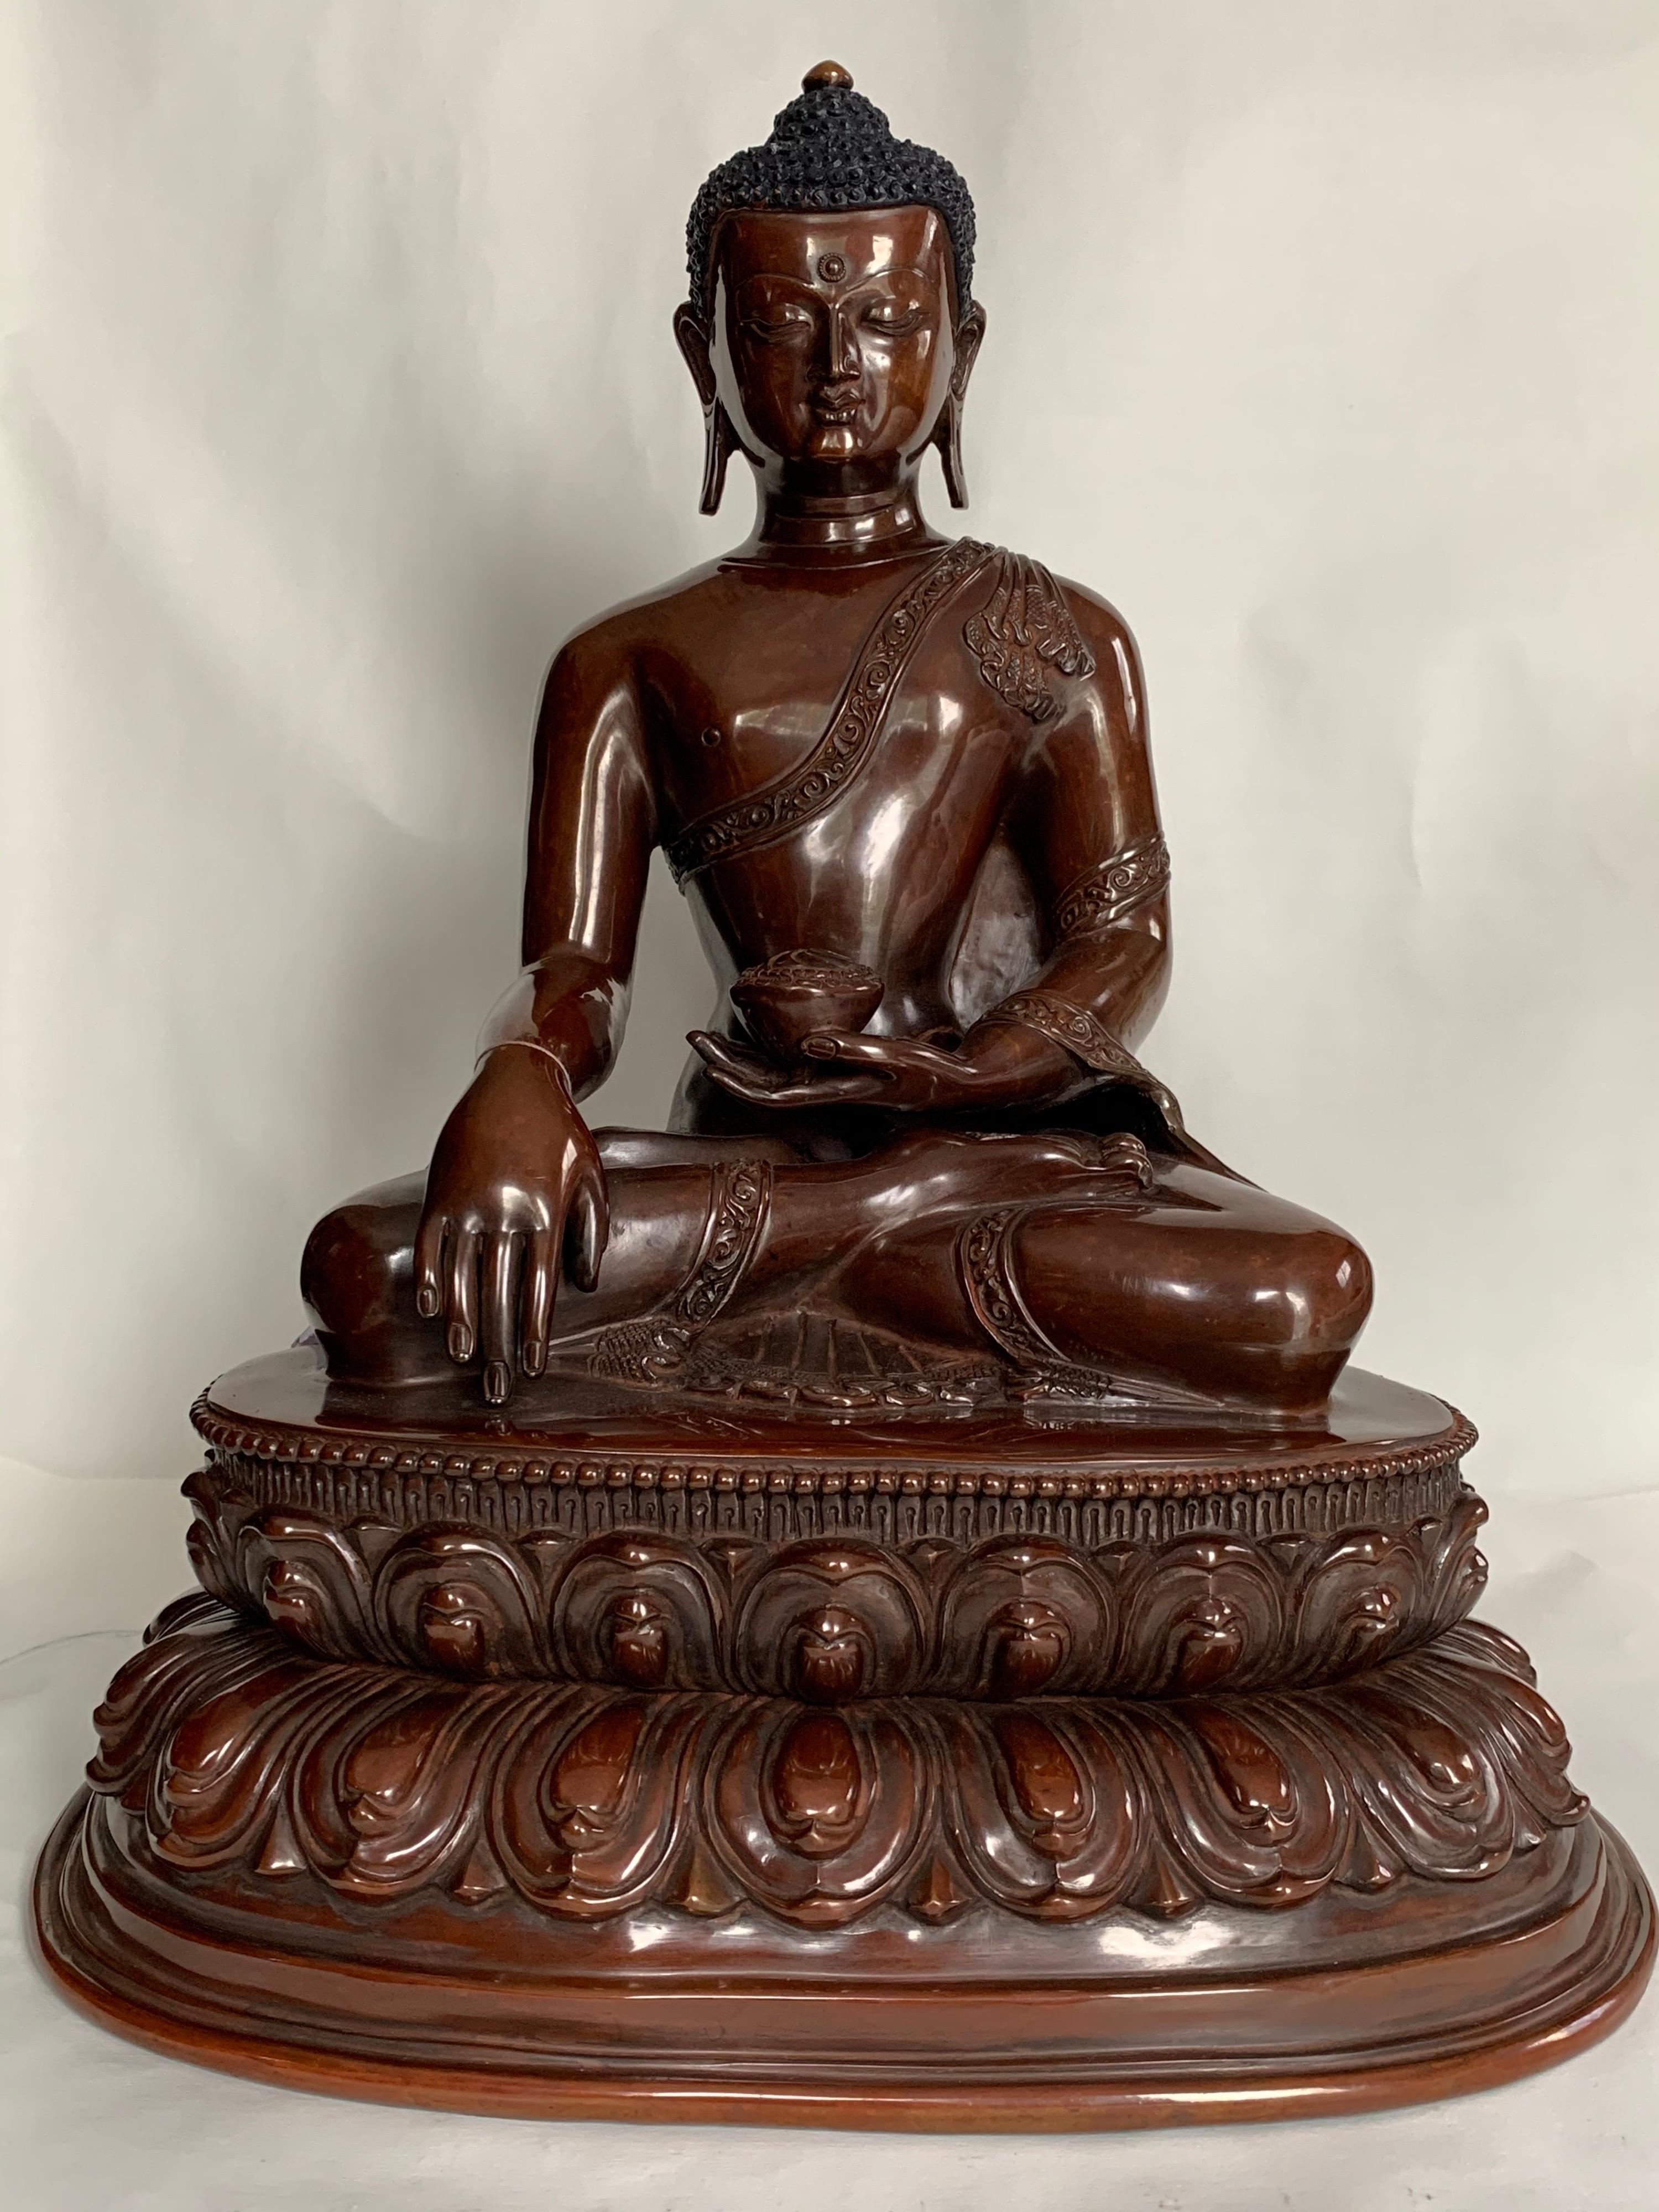 Unknown Figurative Sculpture - Buddha Statue 12 Inch Handcrafted by Lost Wax Process